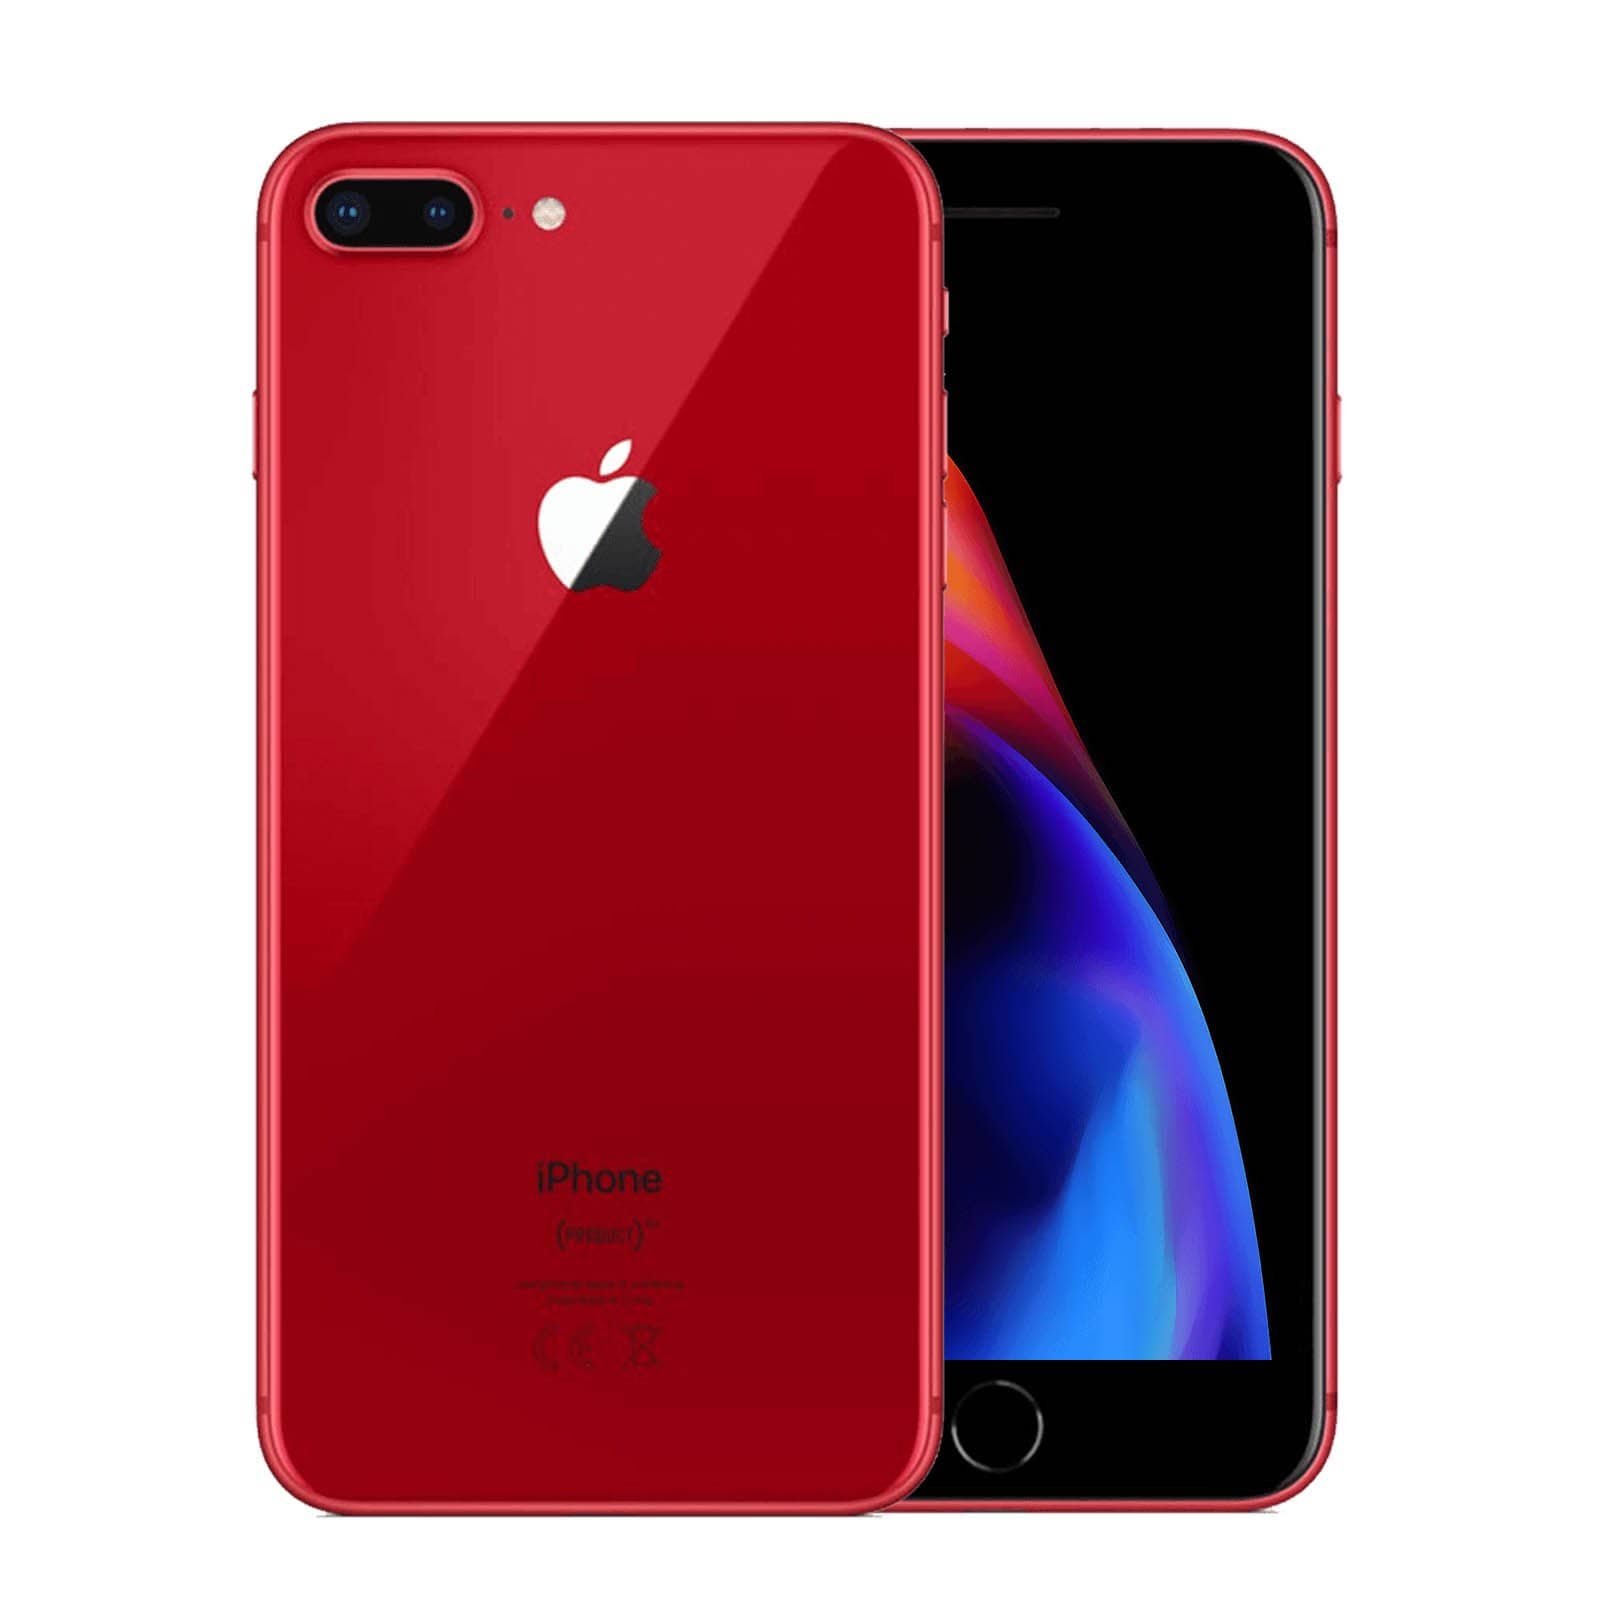 Apple iPhone 8 Plus 64GB Product Red Very Good - Unlocked 64GB Product Red Very Good